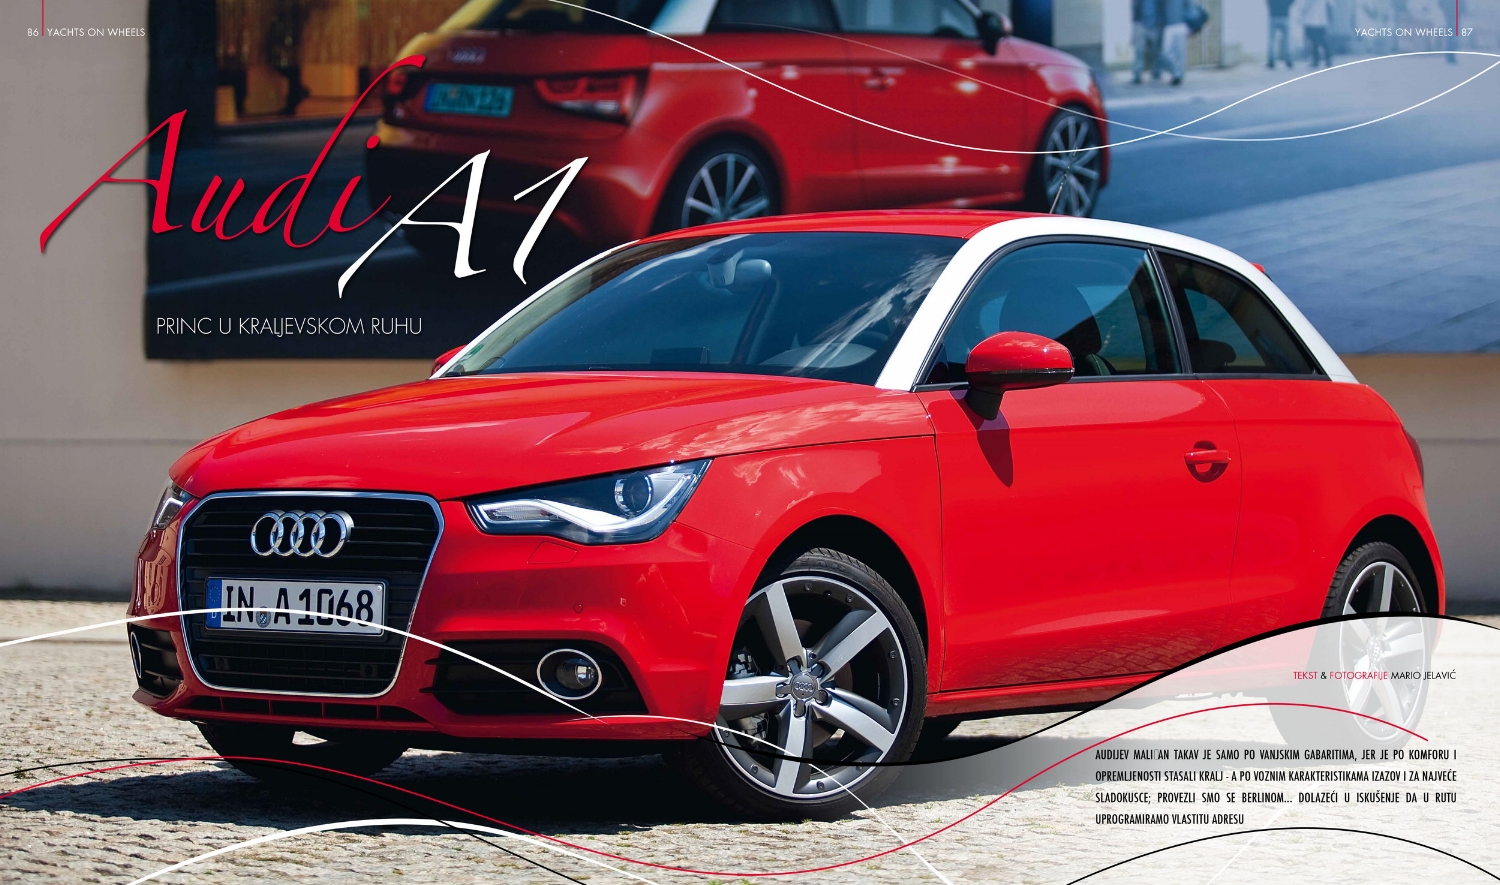 The story of Audi A1